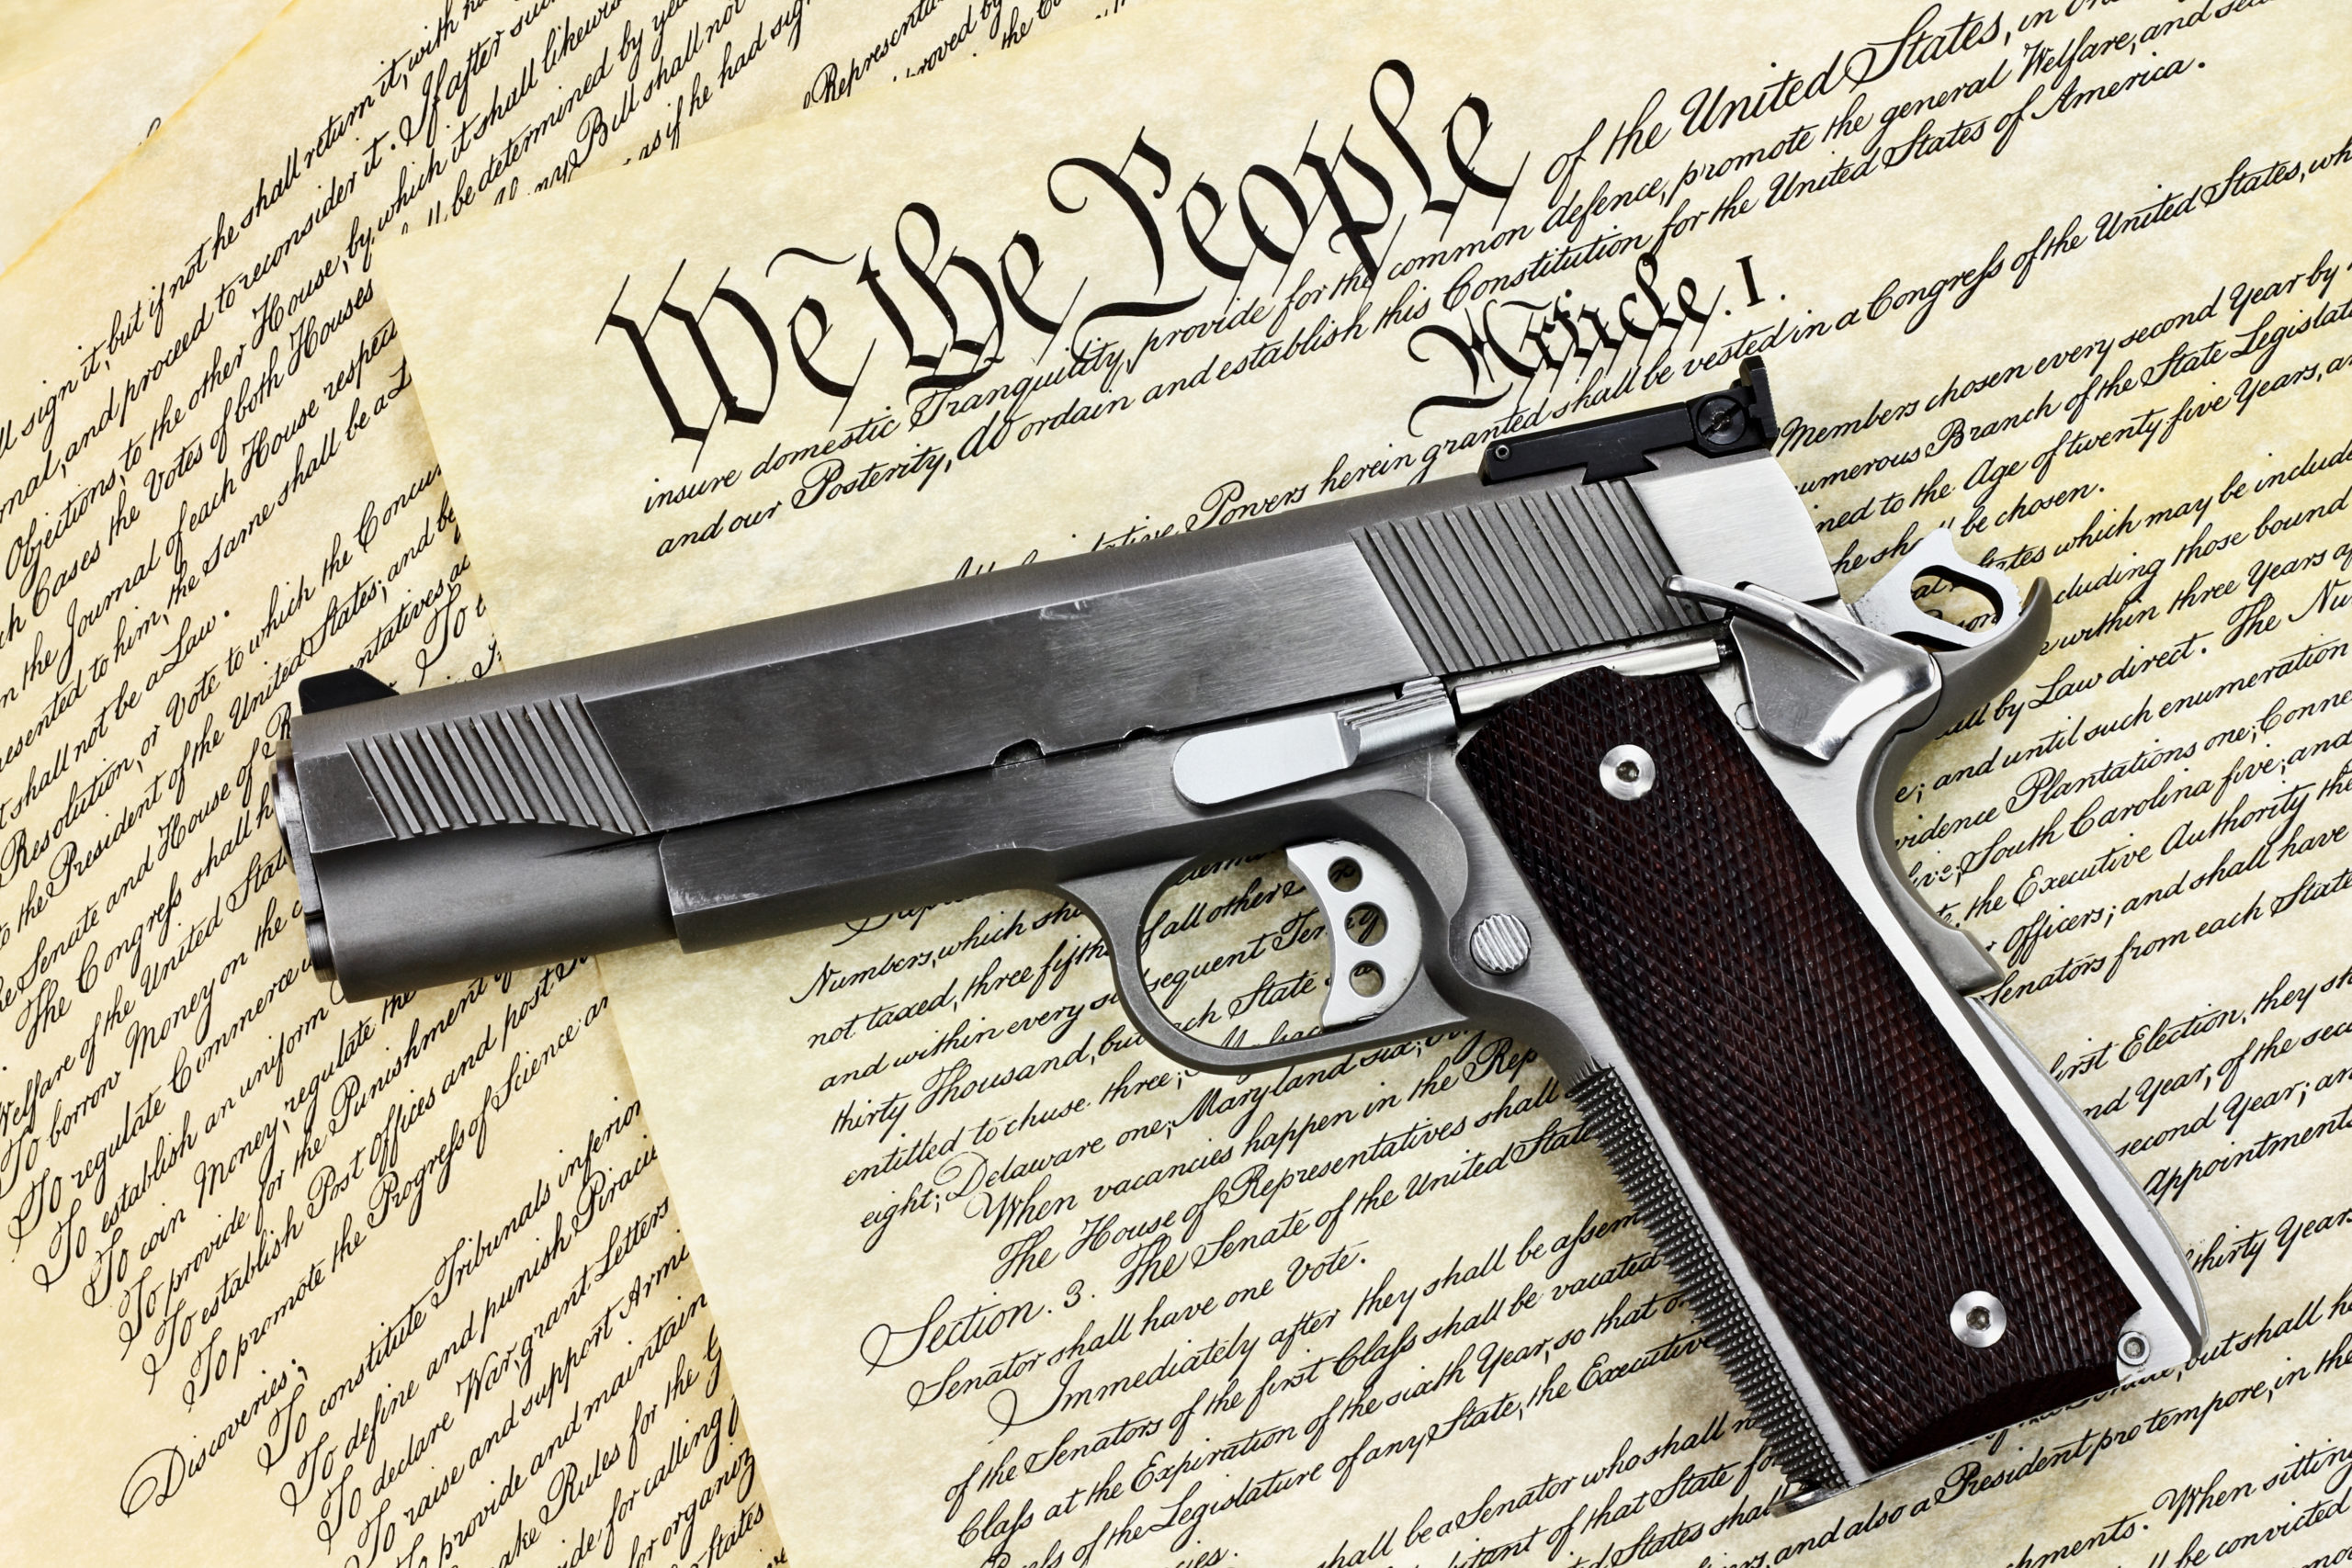 HR 5717 and the 2020 Attack on 2A